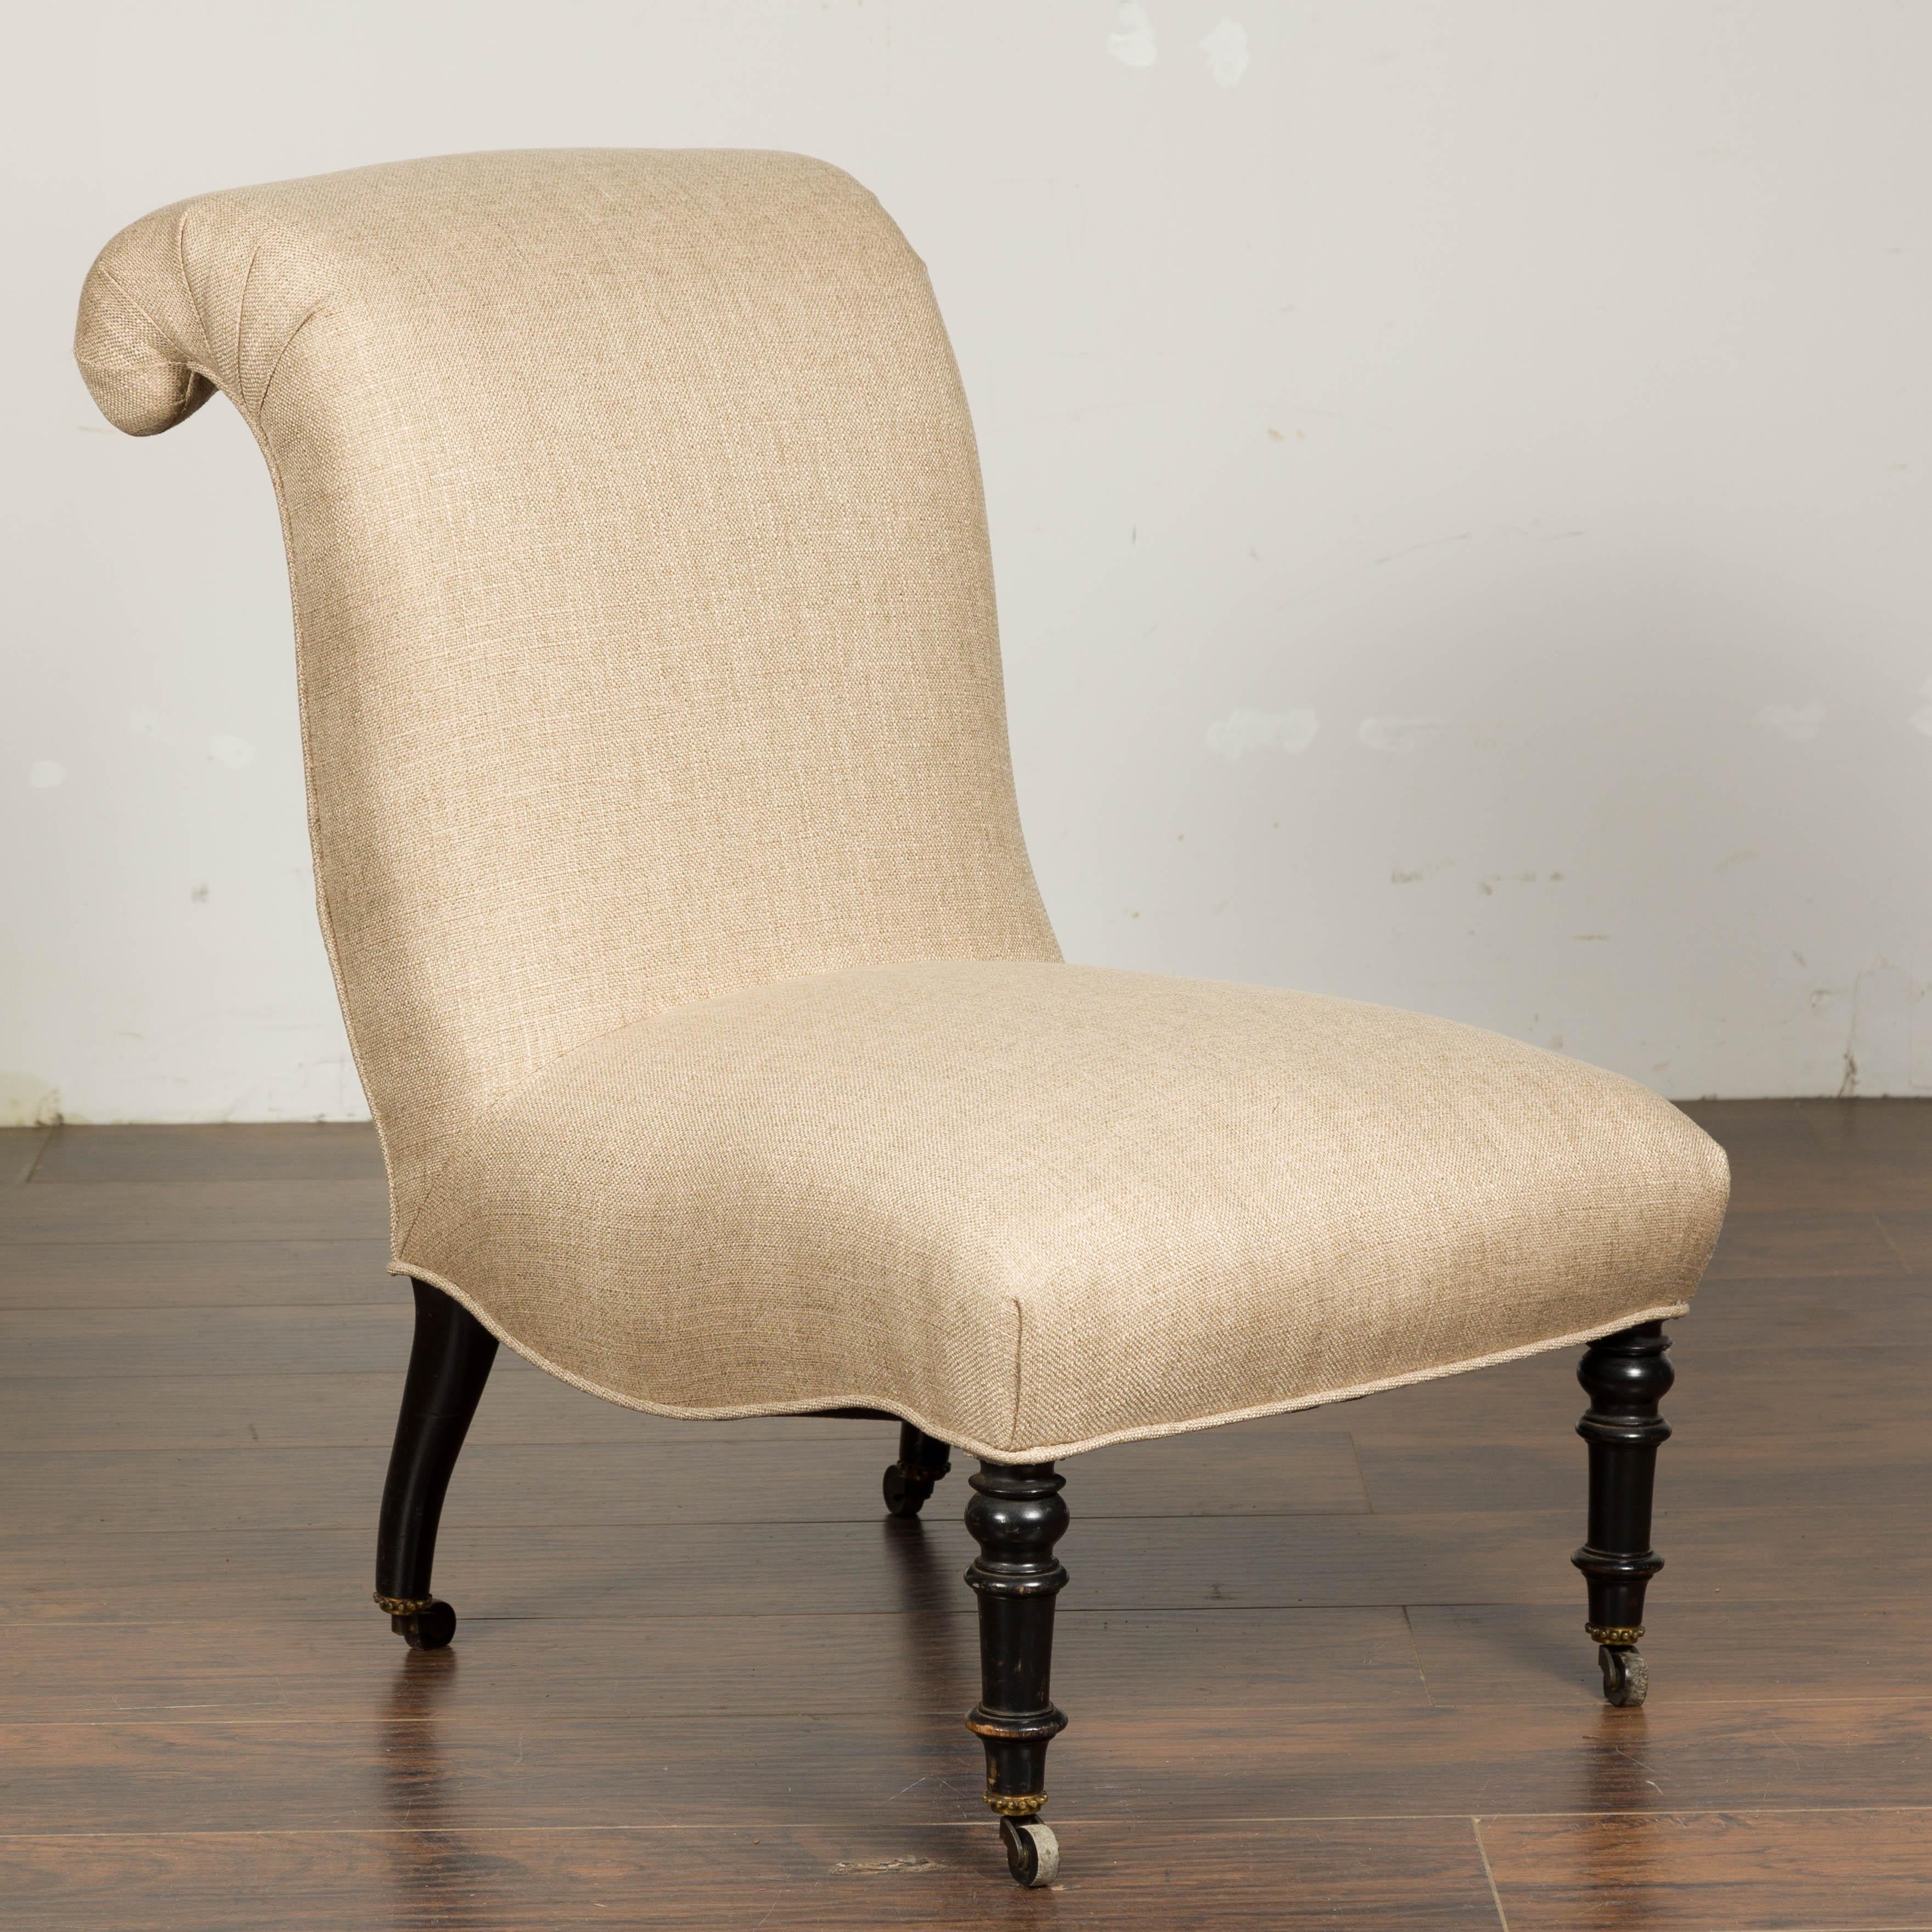 Upholstery 1900s Turn of the Century French Slipper Chair with Out-Scrolling Back